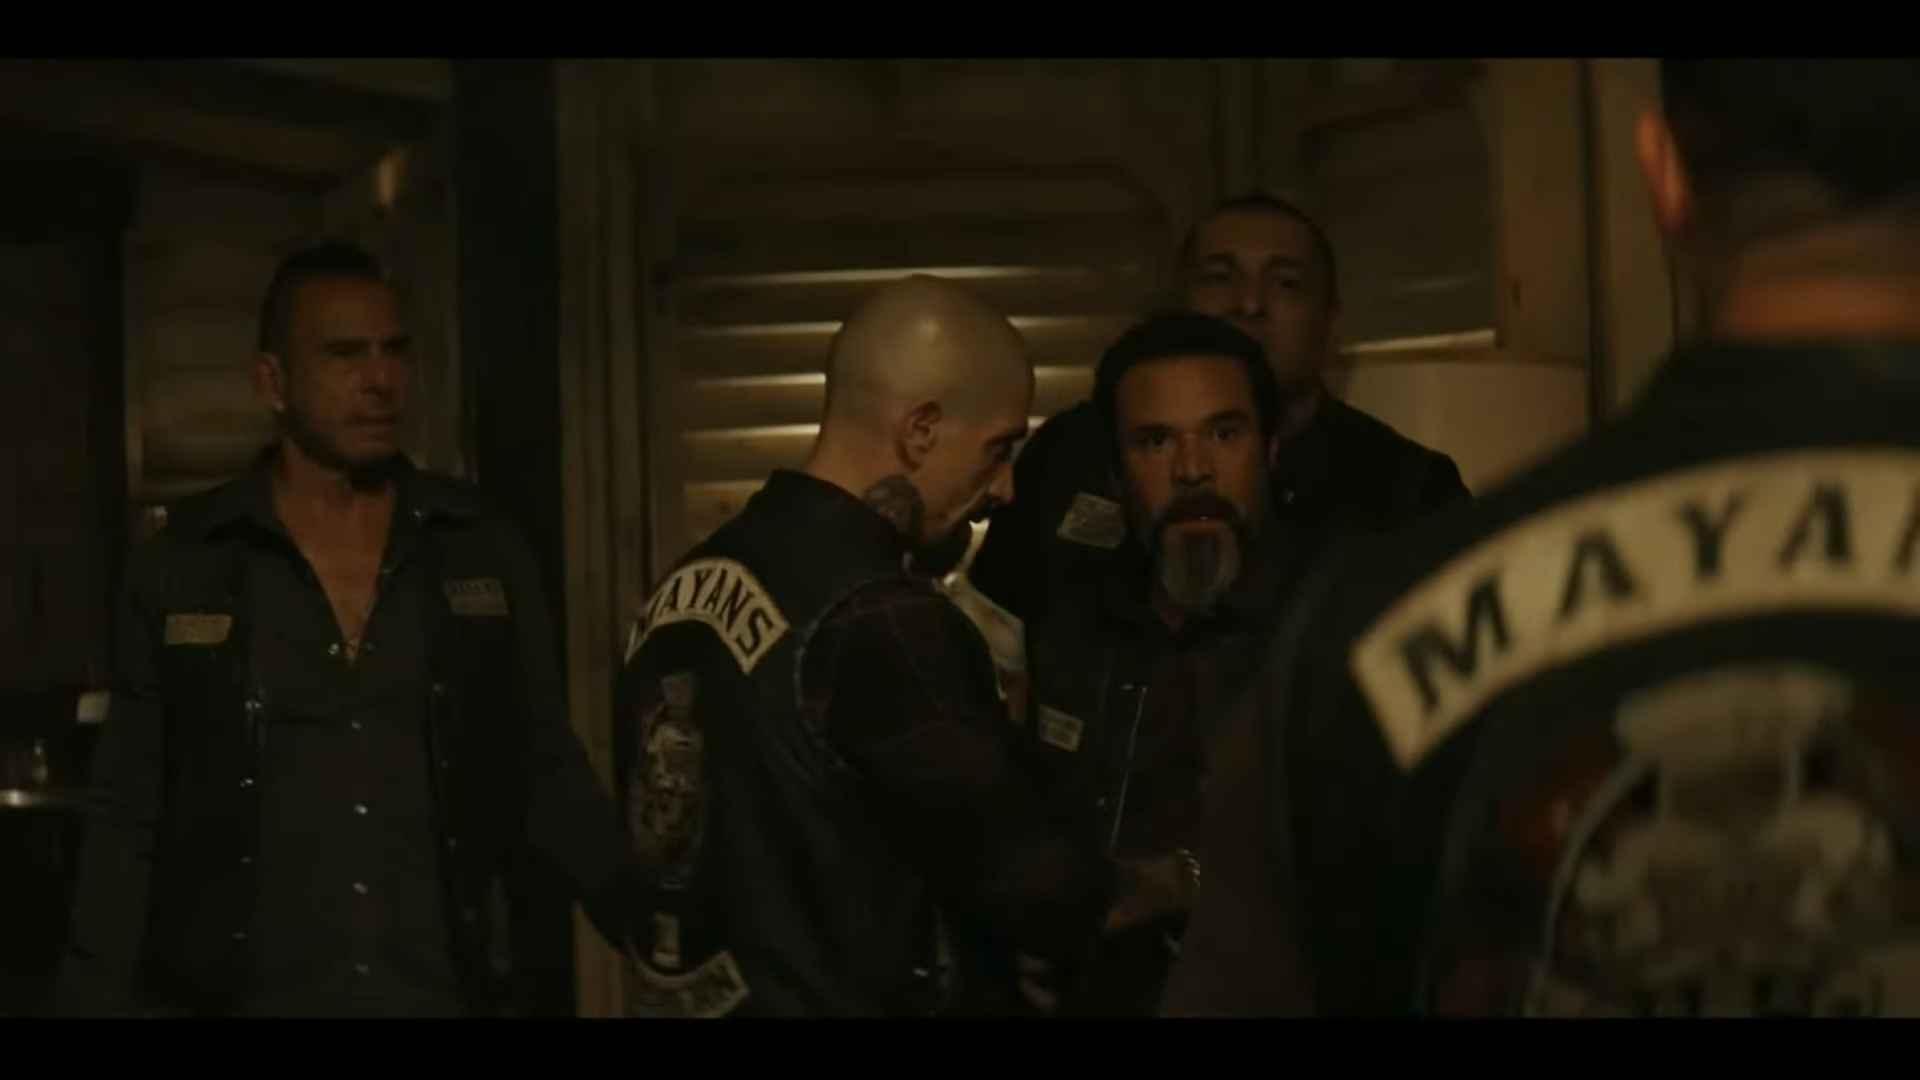 What To Expect From Mayans M.C. Season 4 Episode 4?